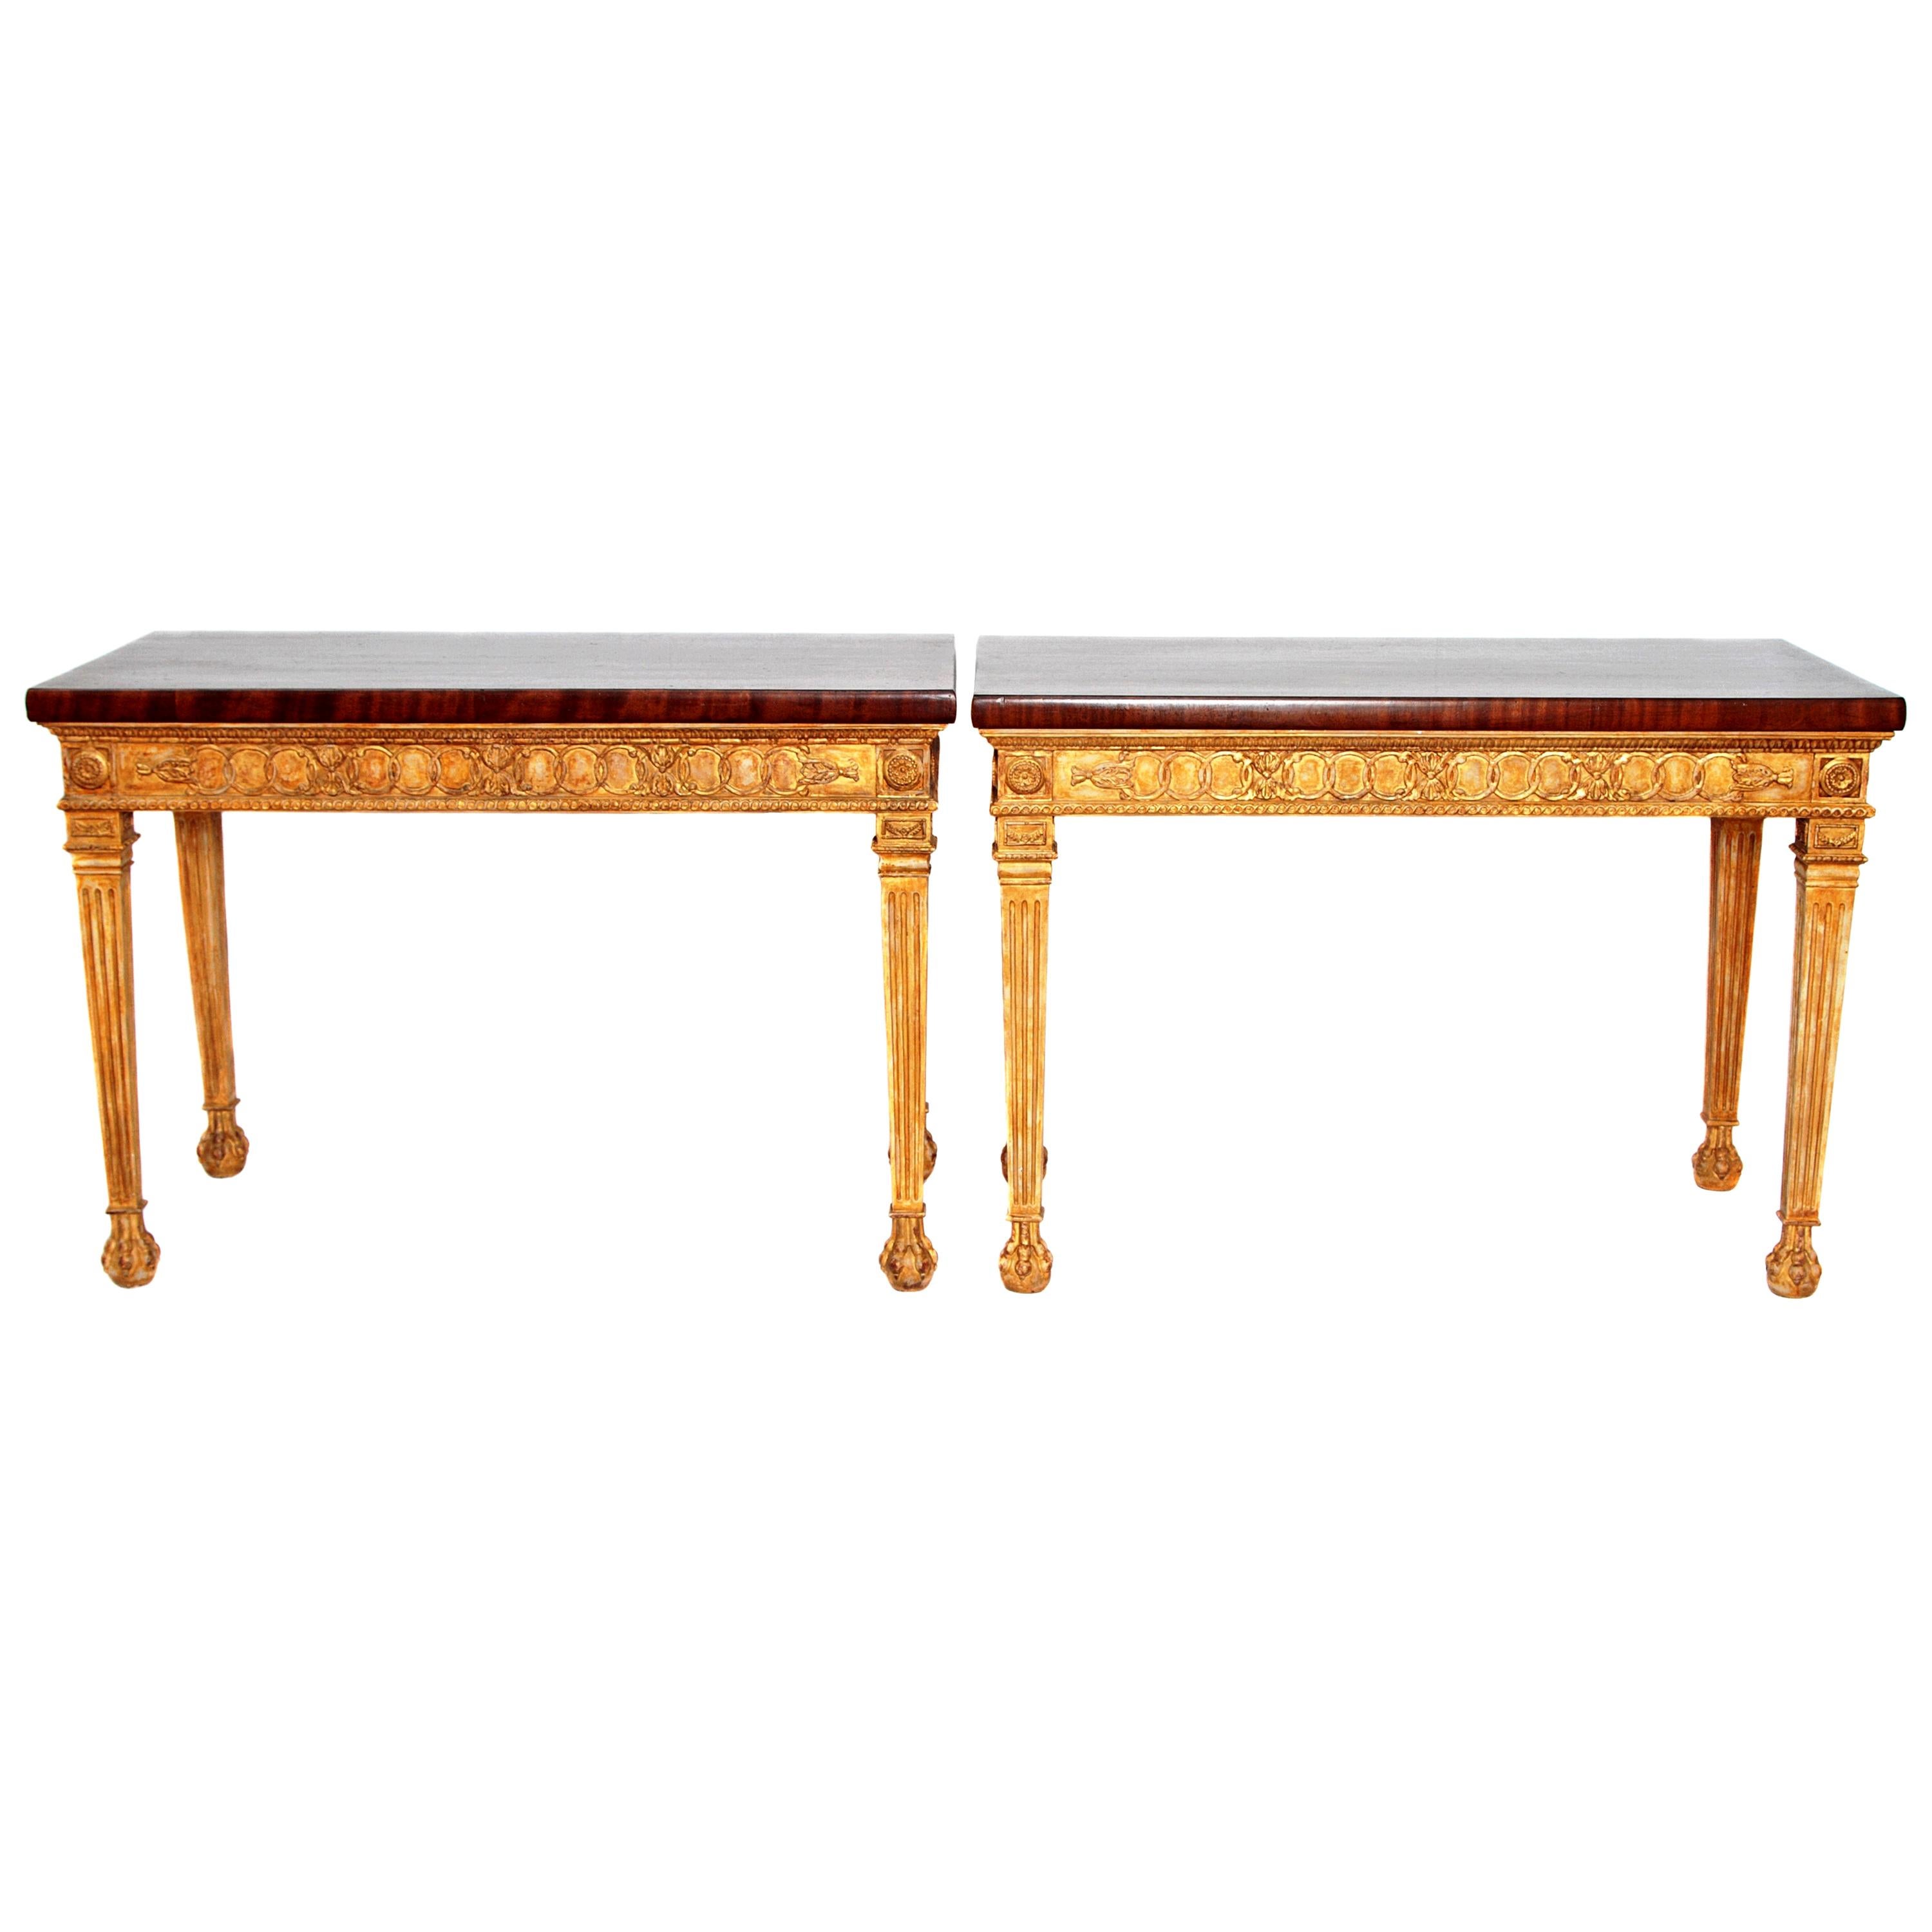 George III-Style Giltwood and Mahogany Console Tables / Pair